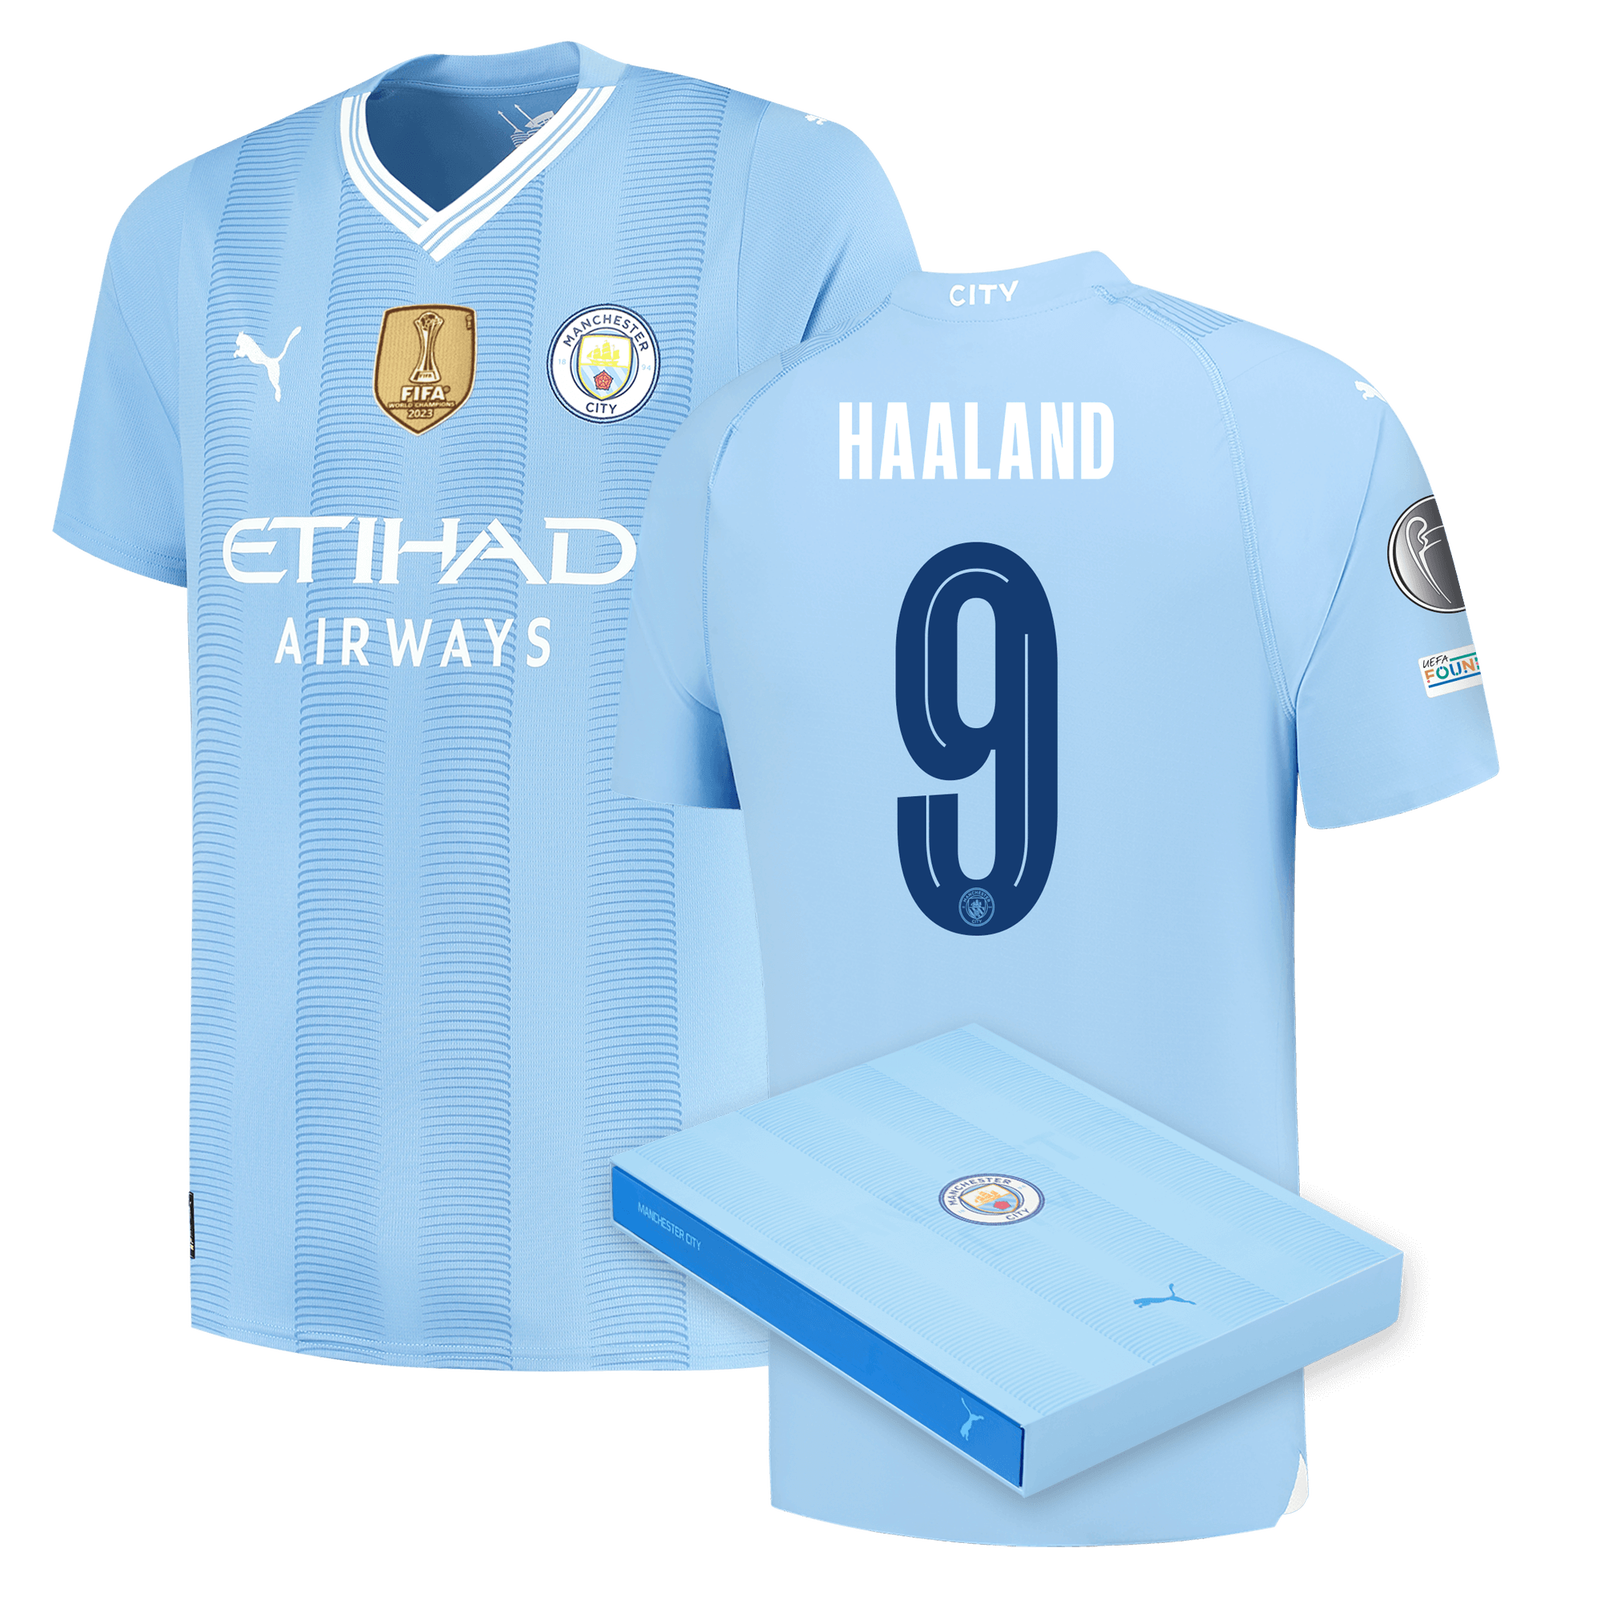 PREORDER (Estimated Arrival Q1 2024) POP Football: Manchester City- Erling  Haaland